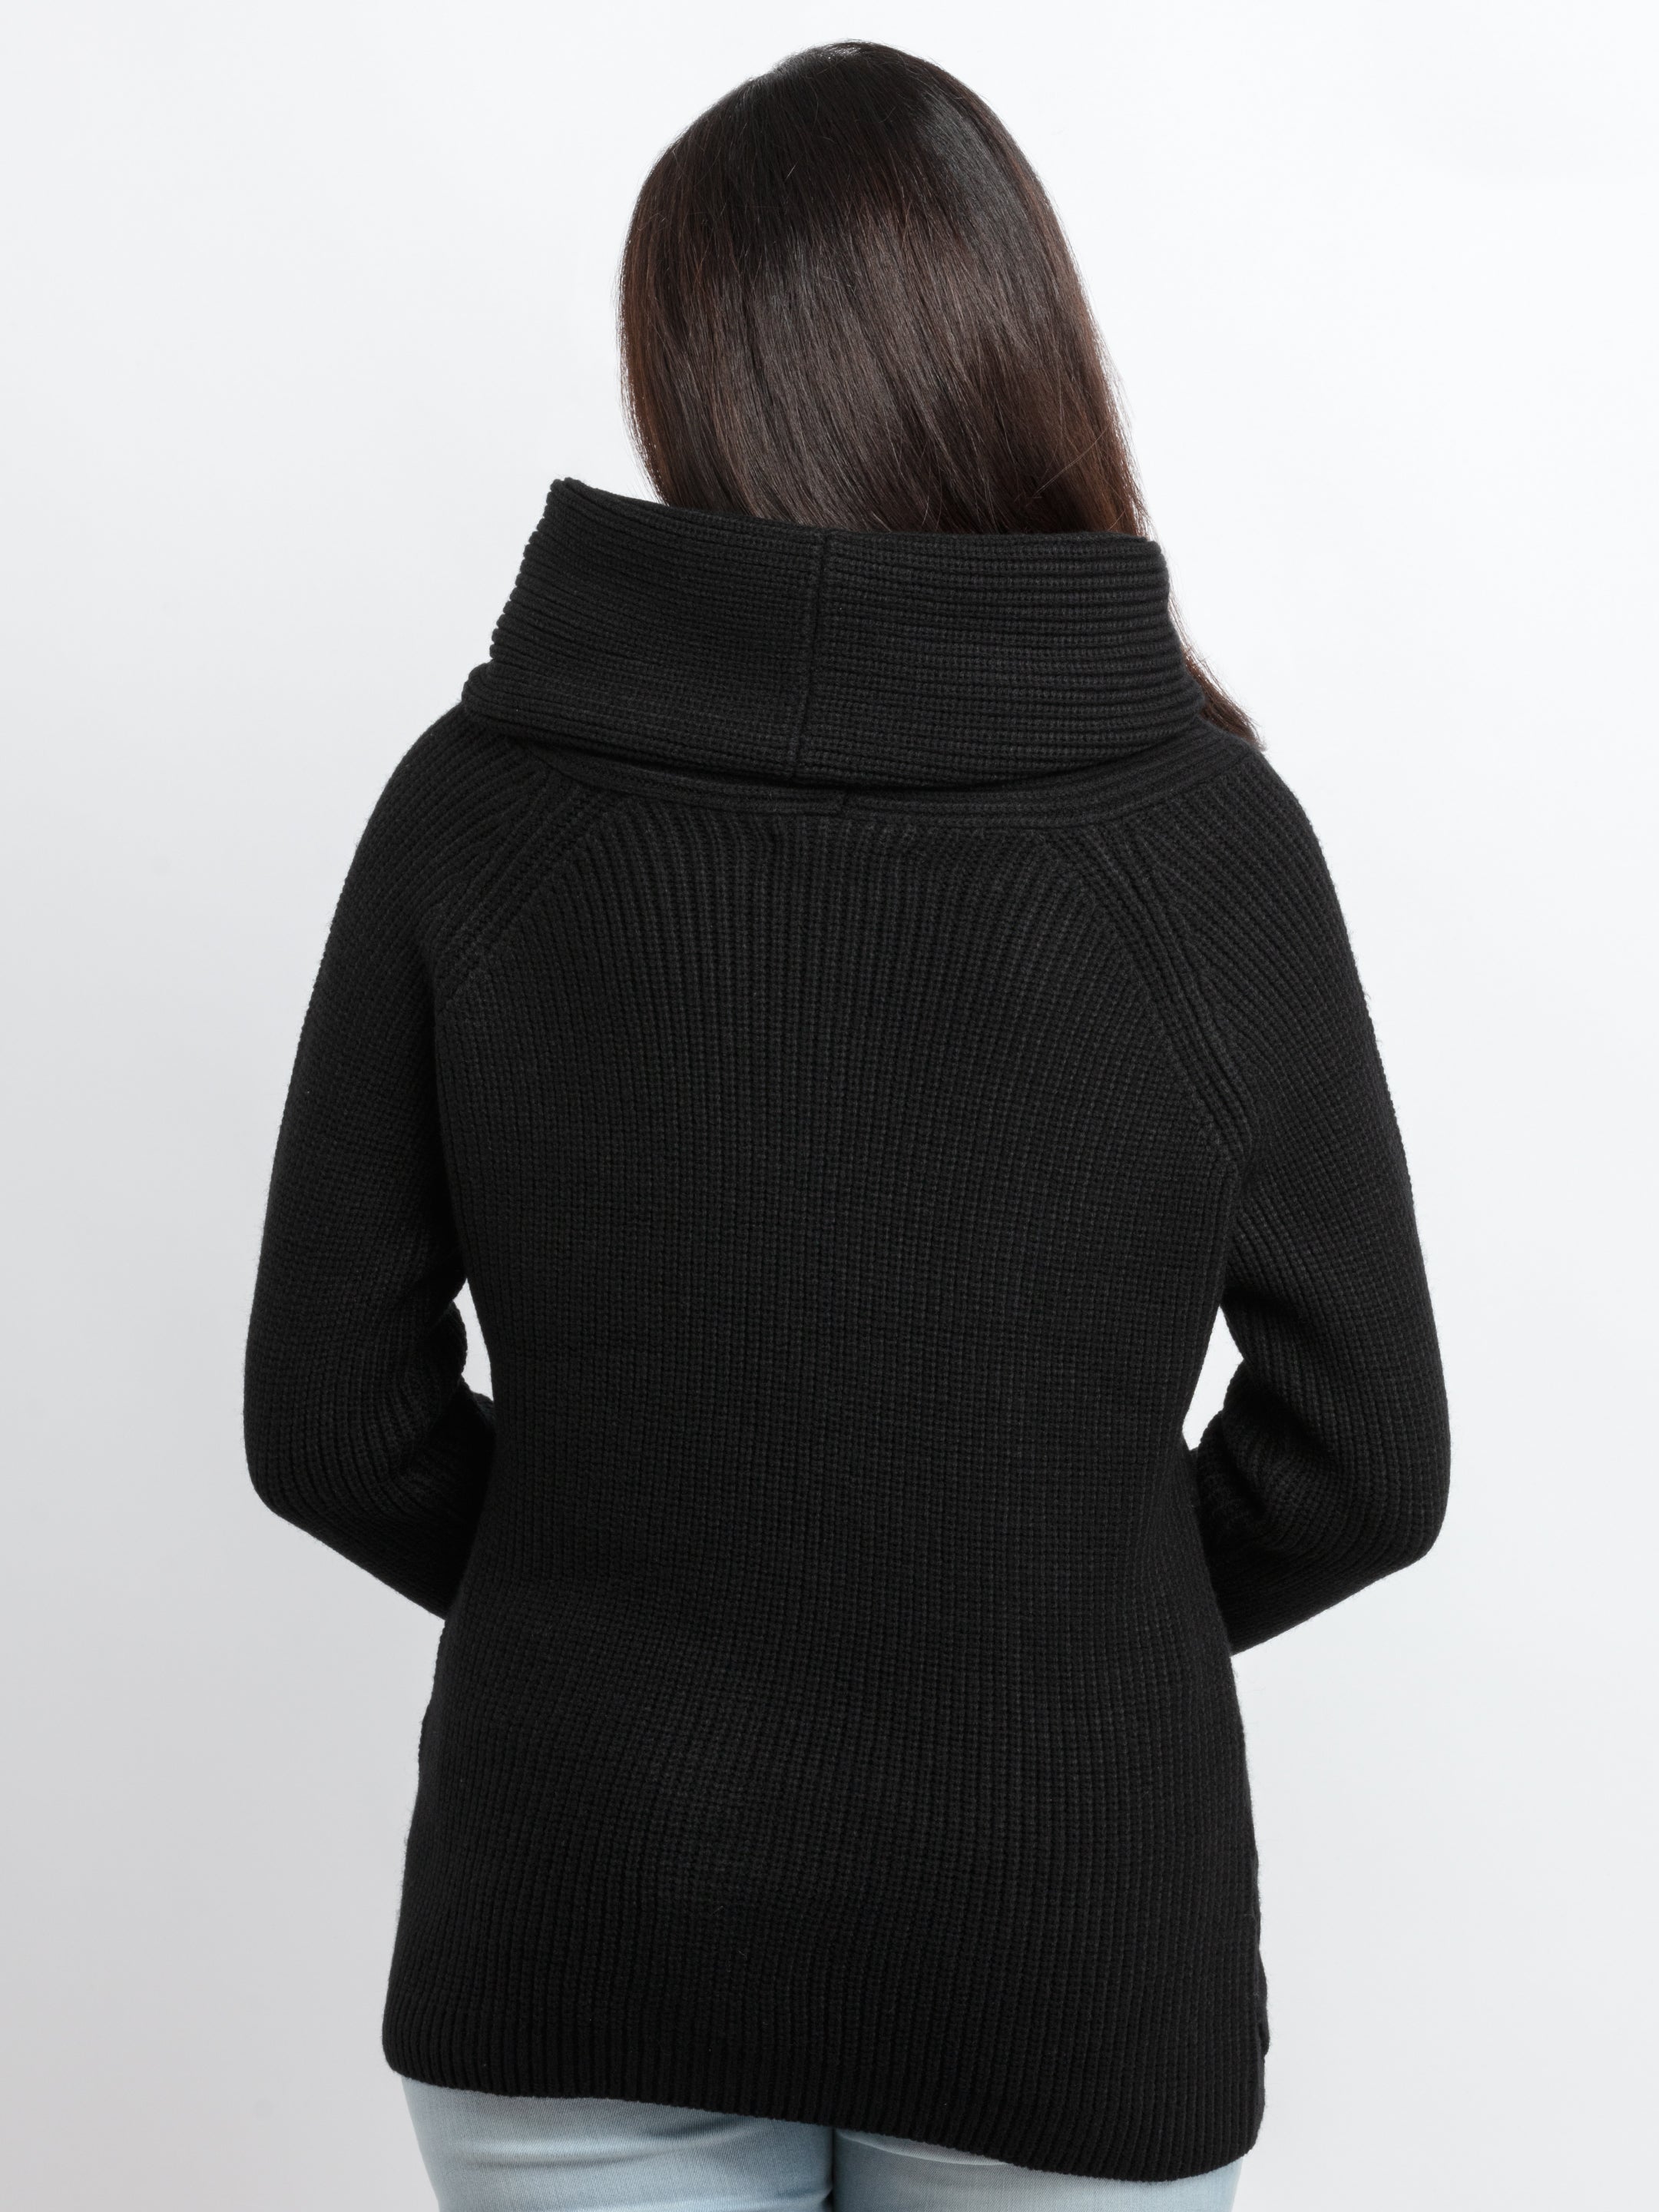 Womens Cable Knit Cowl Neck Sweater - S / Black / SQW-FK-22983-Black